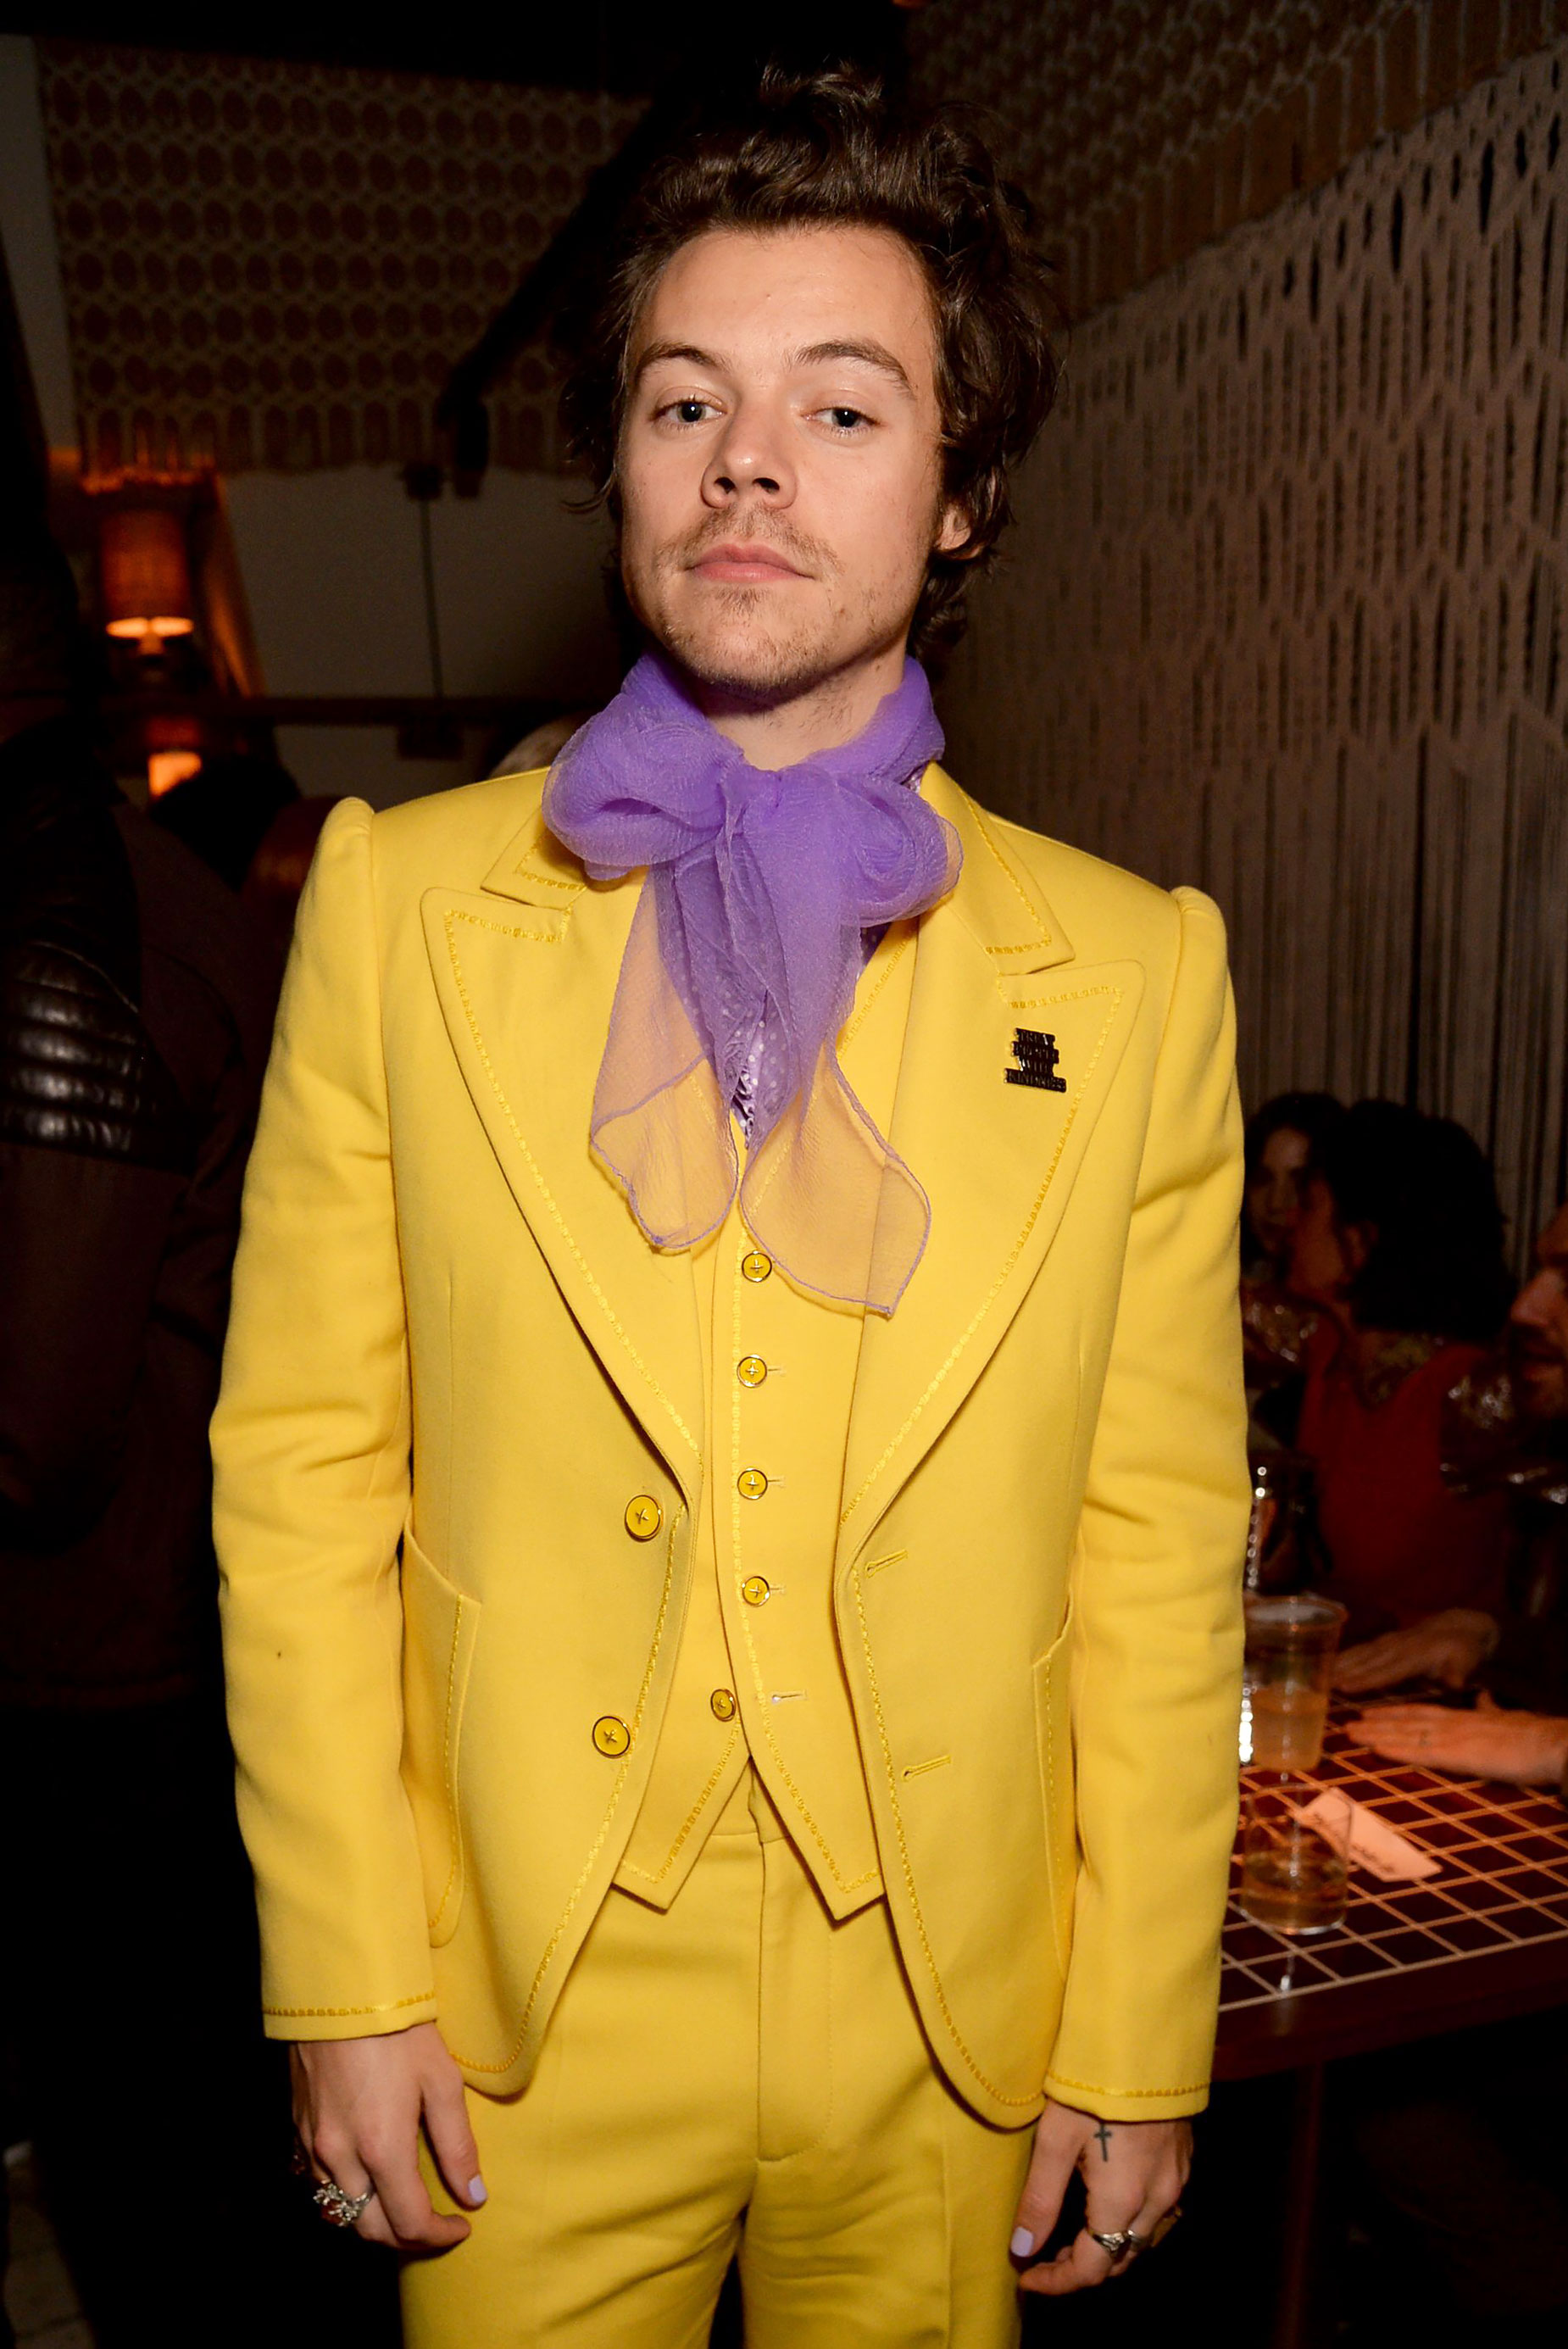 Harry Styles Best Fashion, Hottest Looks: Pics